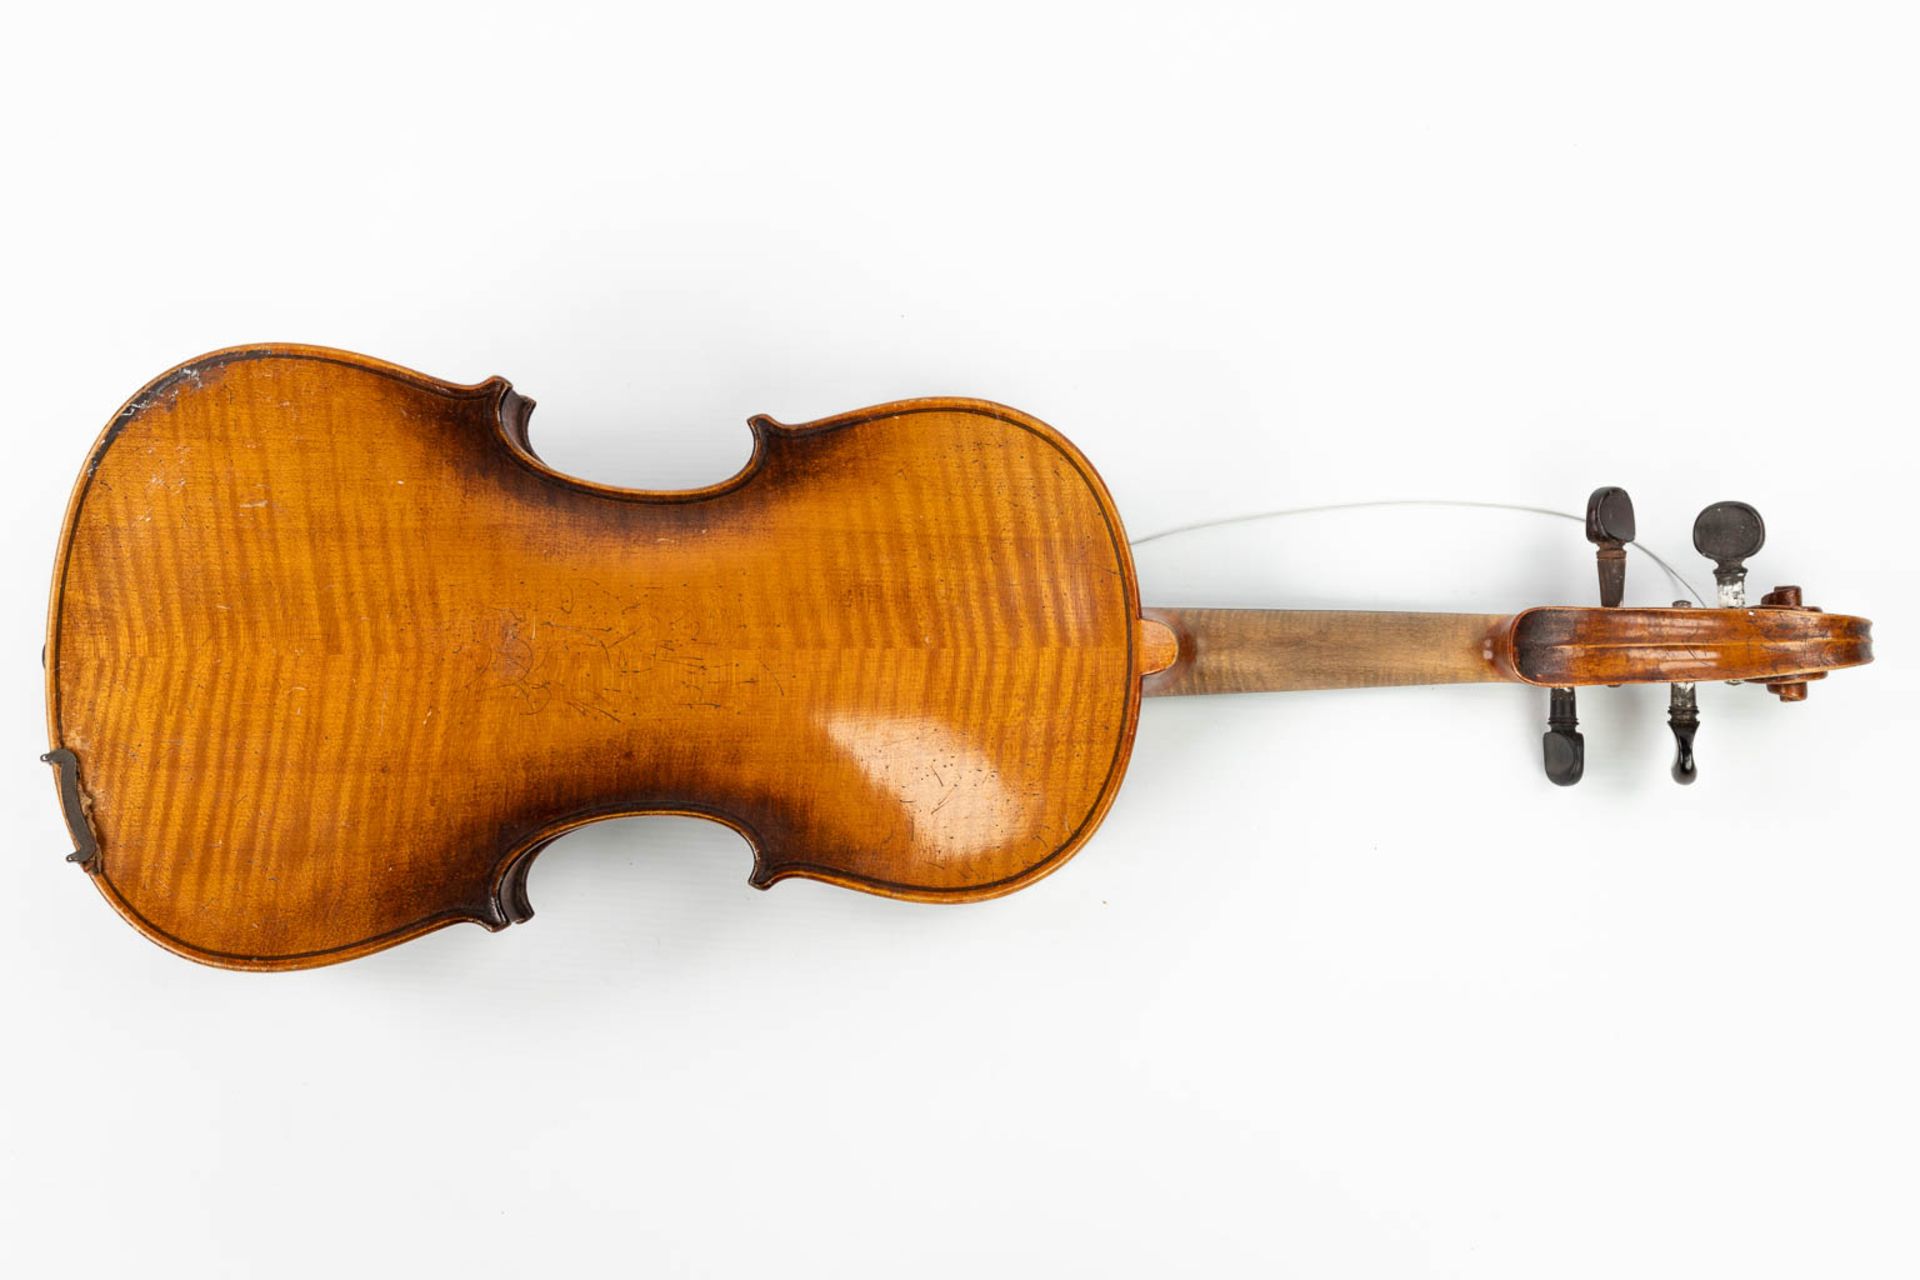 A collection of 3 musical instruments: 2 mandolines and a violin, after a model made by Stradivarius - Image 20 of 56